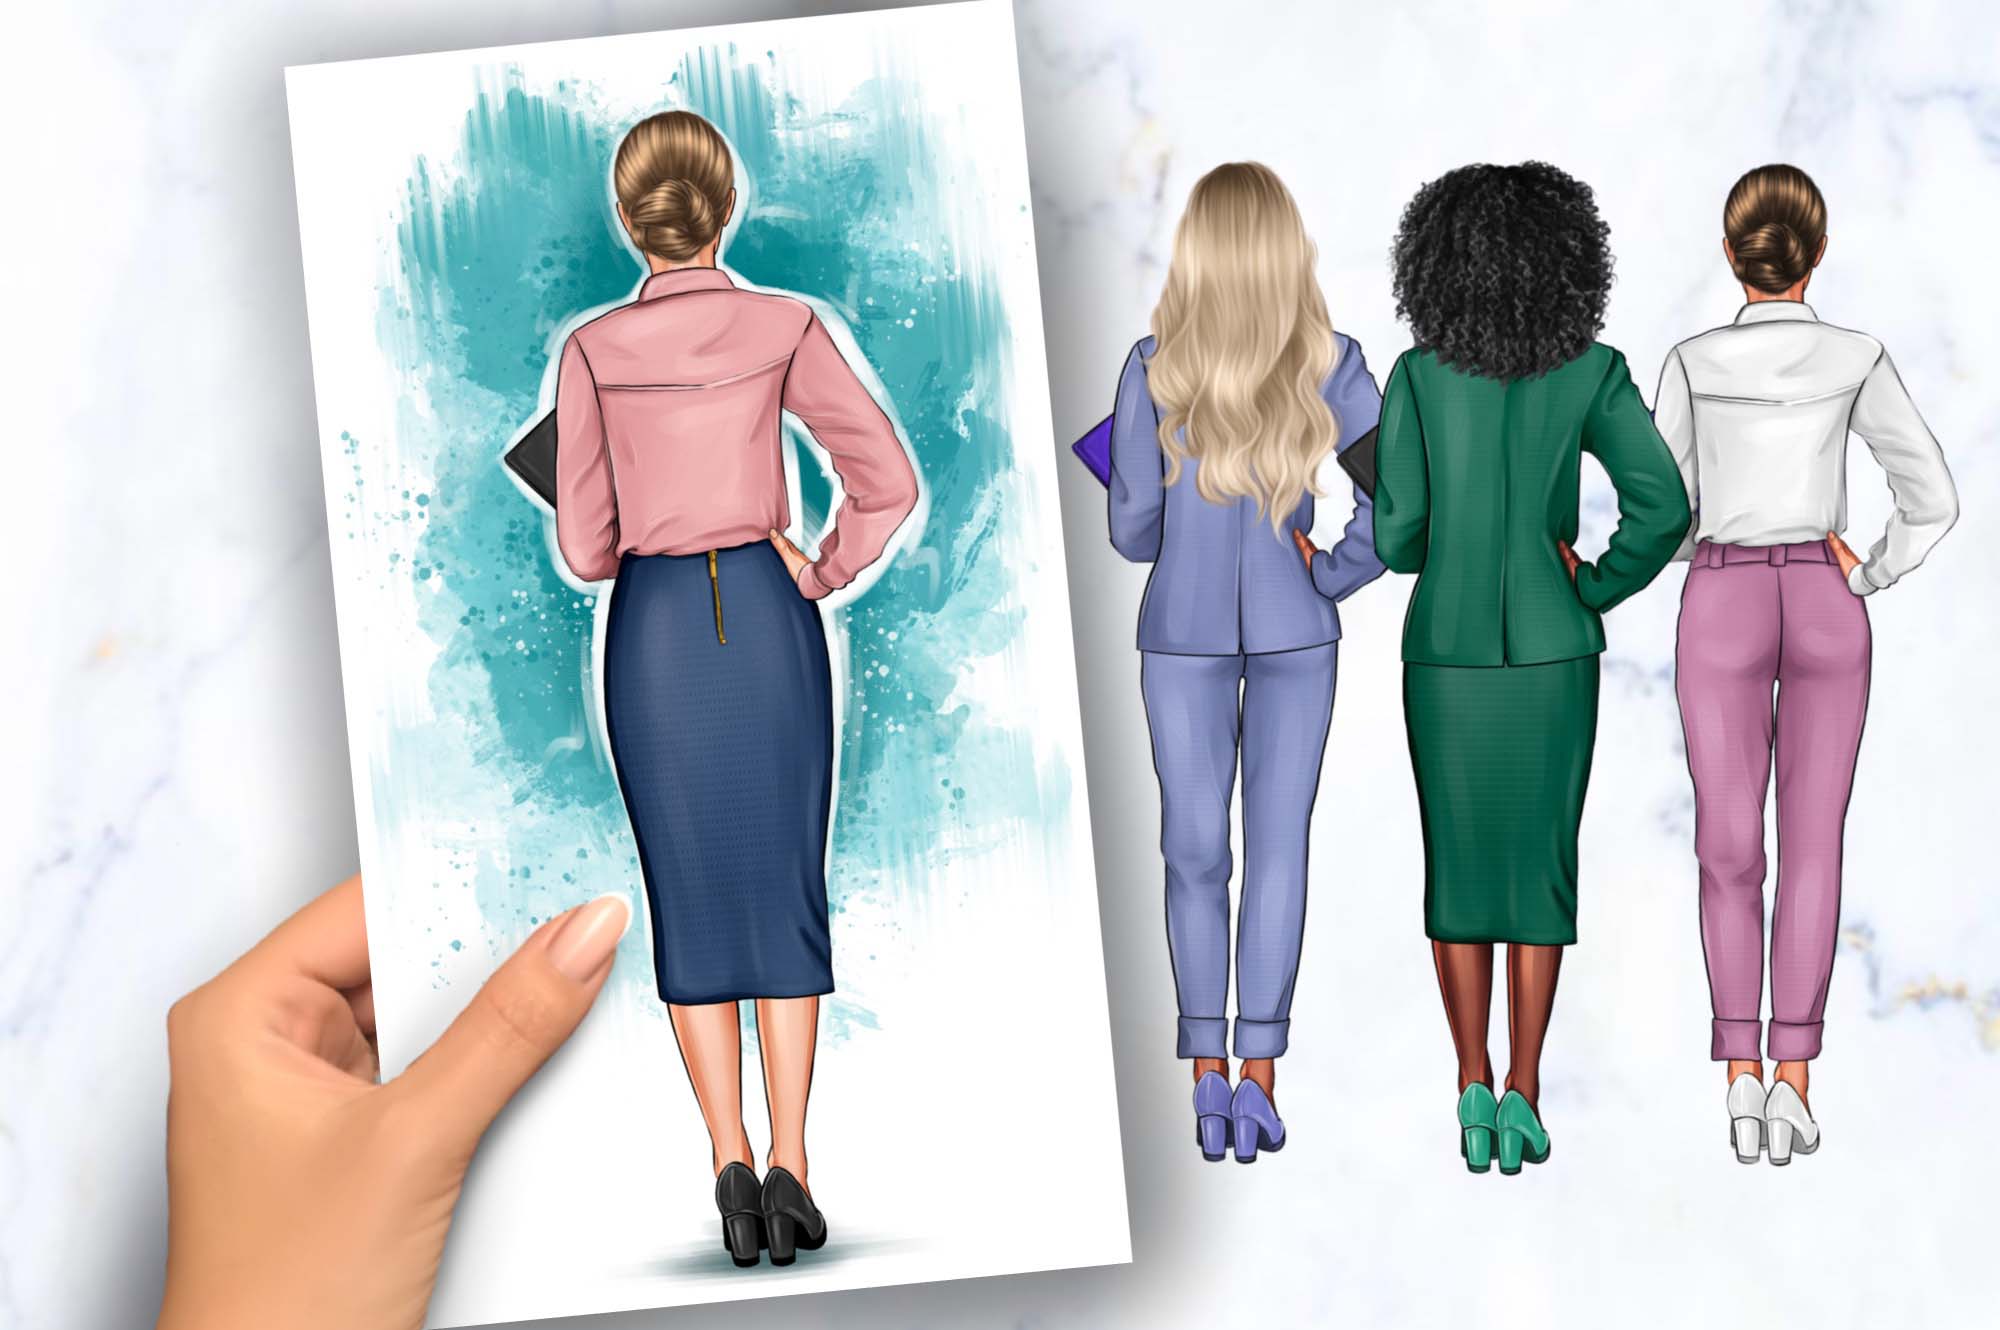 Lady Boss Clipart Facebook Image.